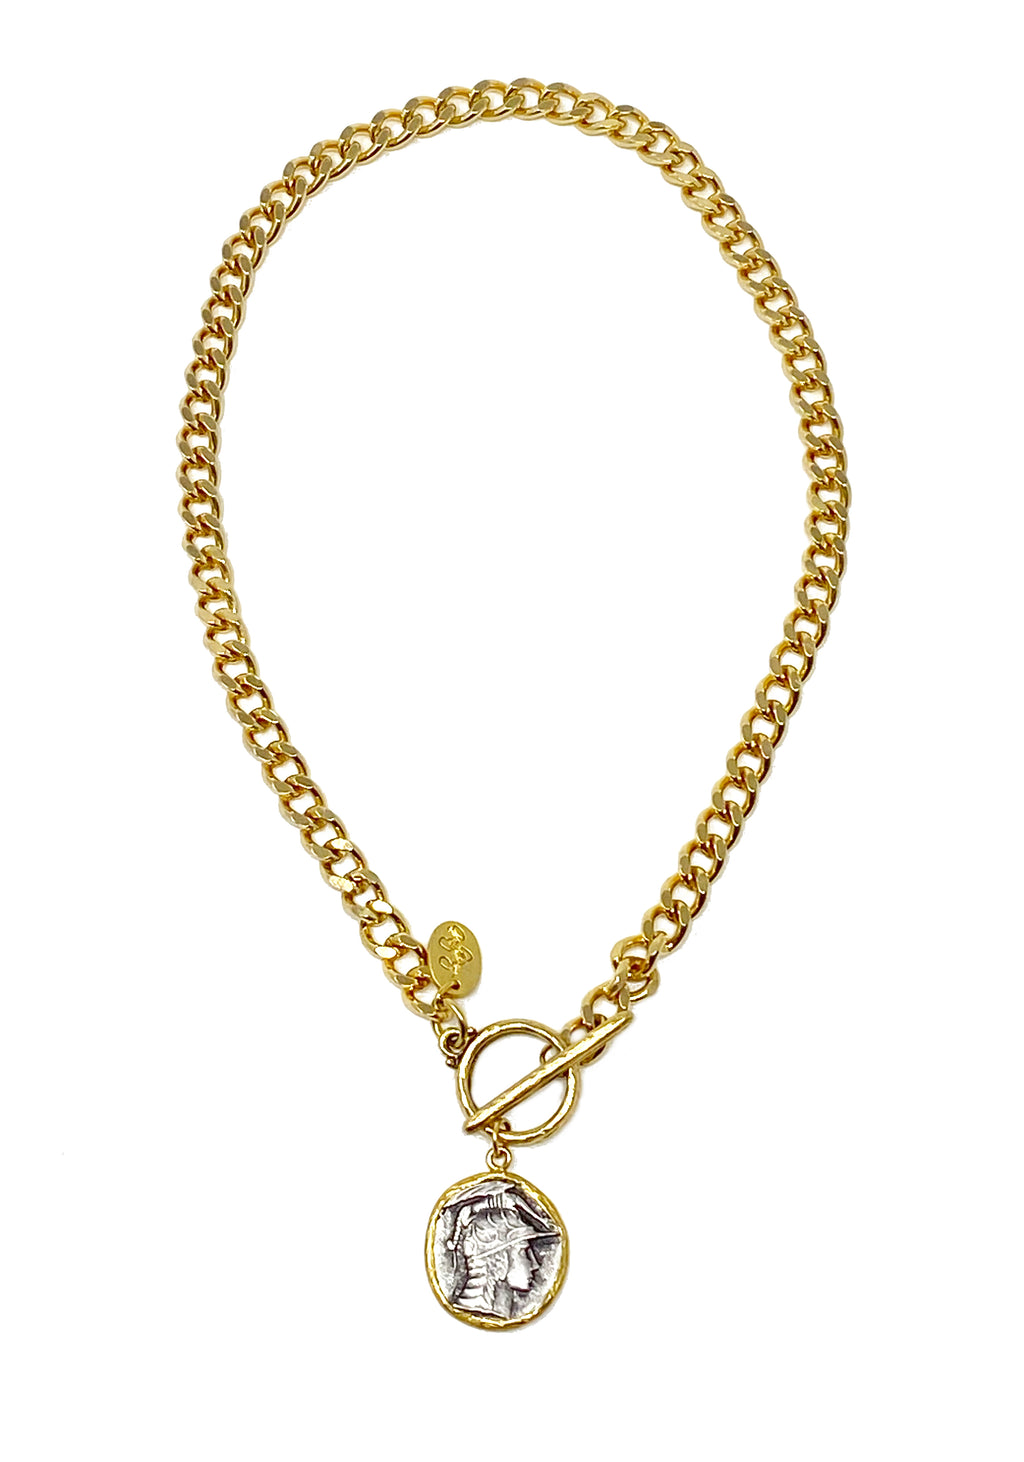 Gold Taylor chain necklace for women 15.5" long